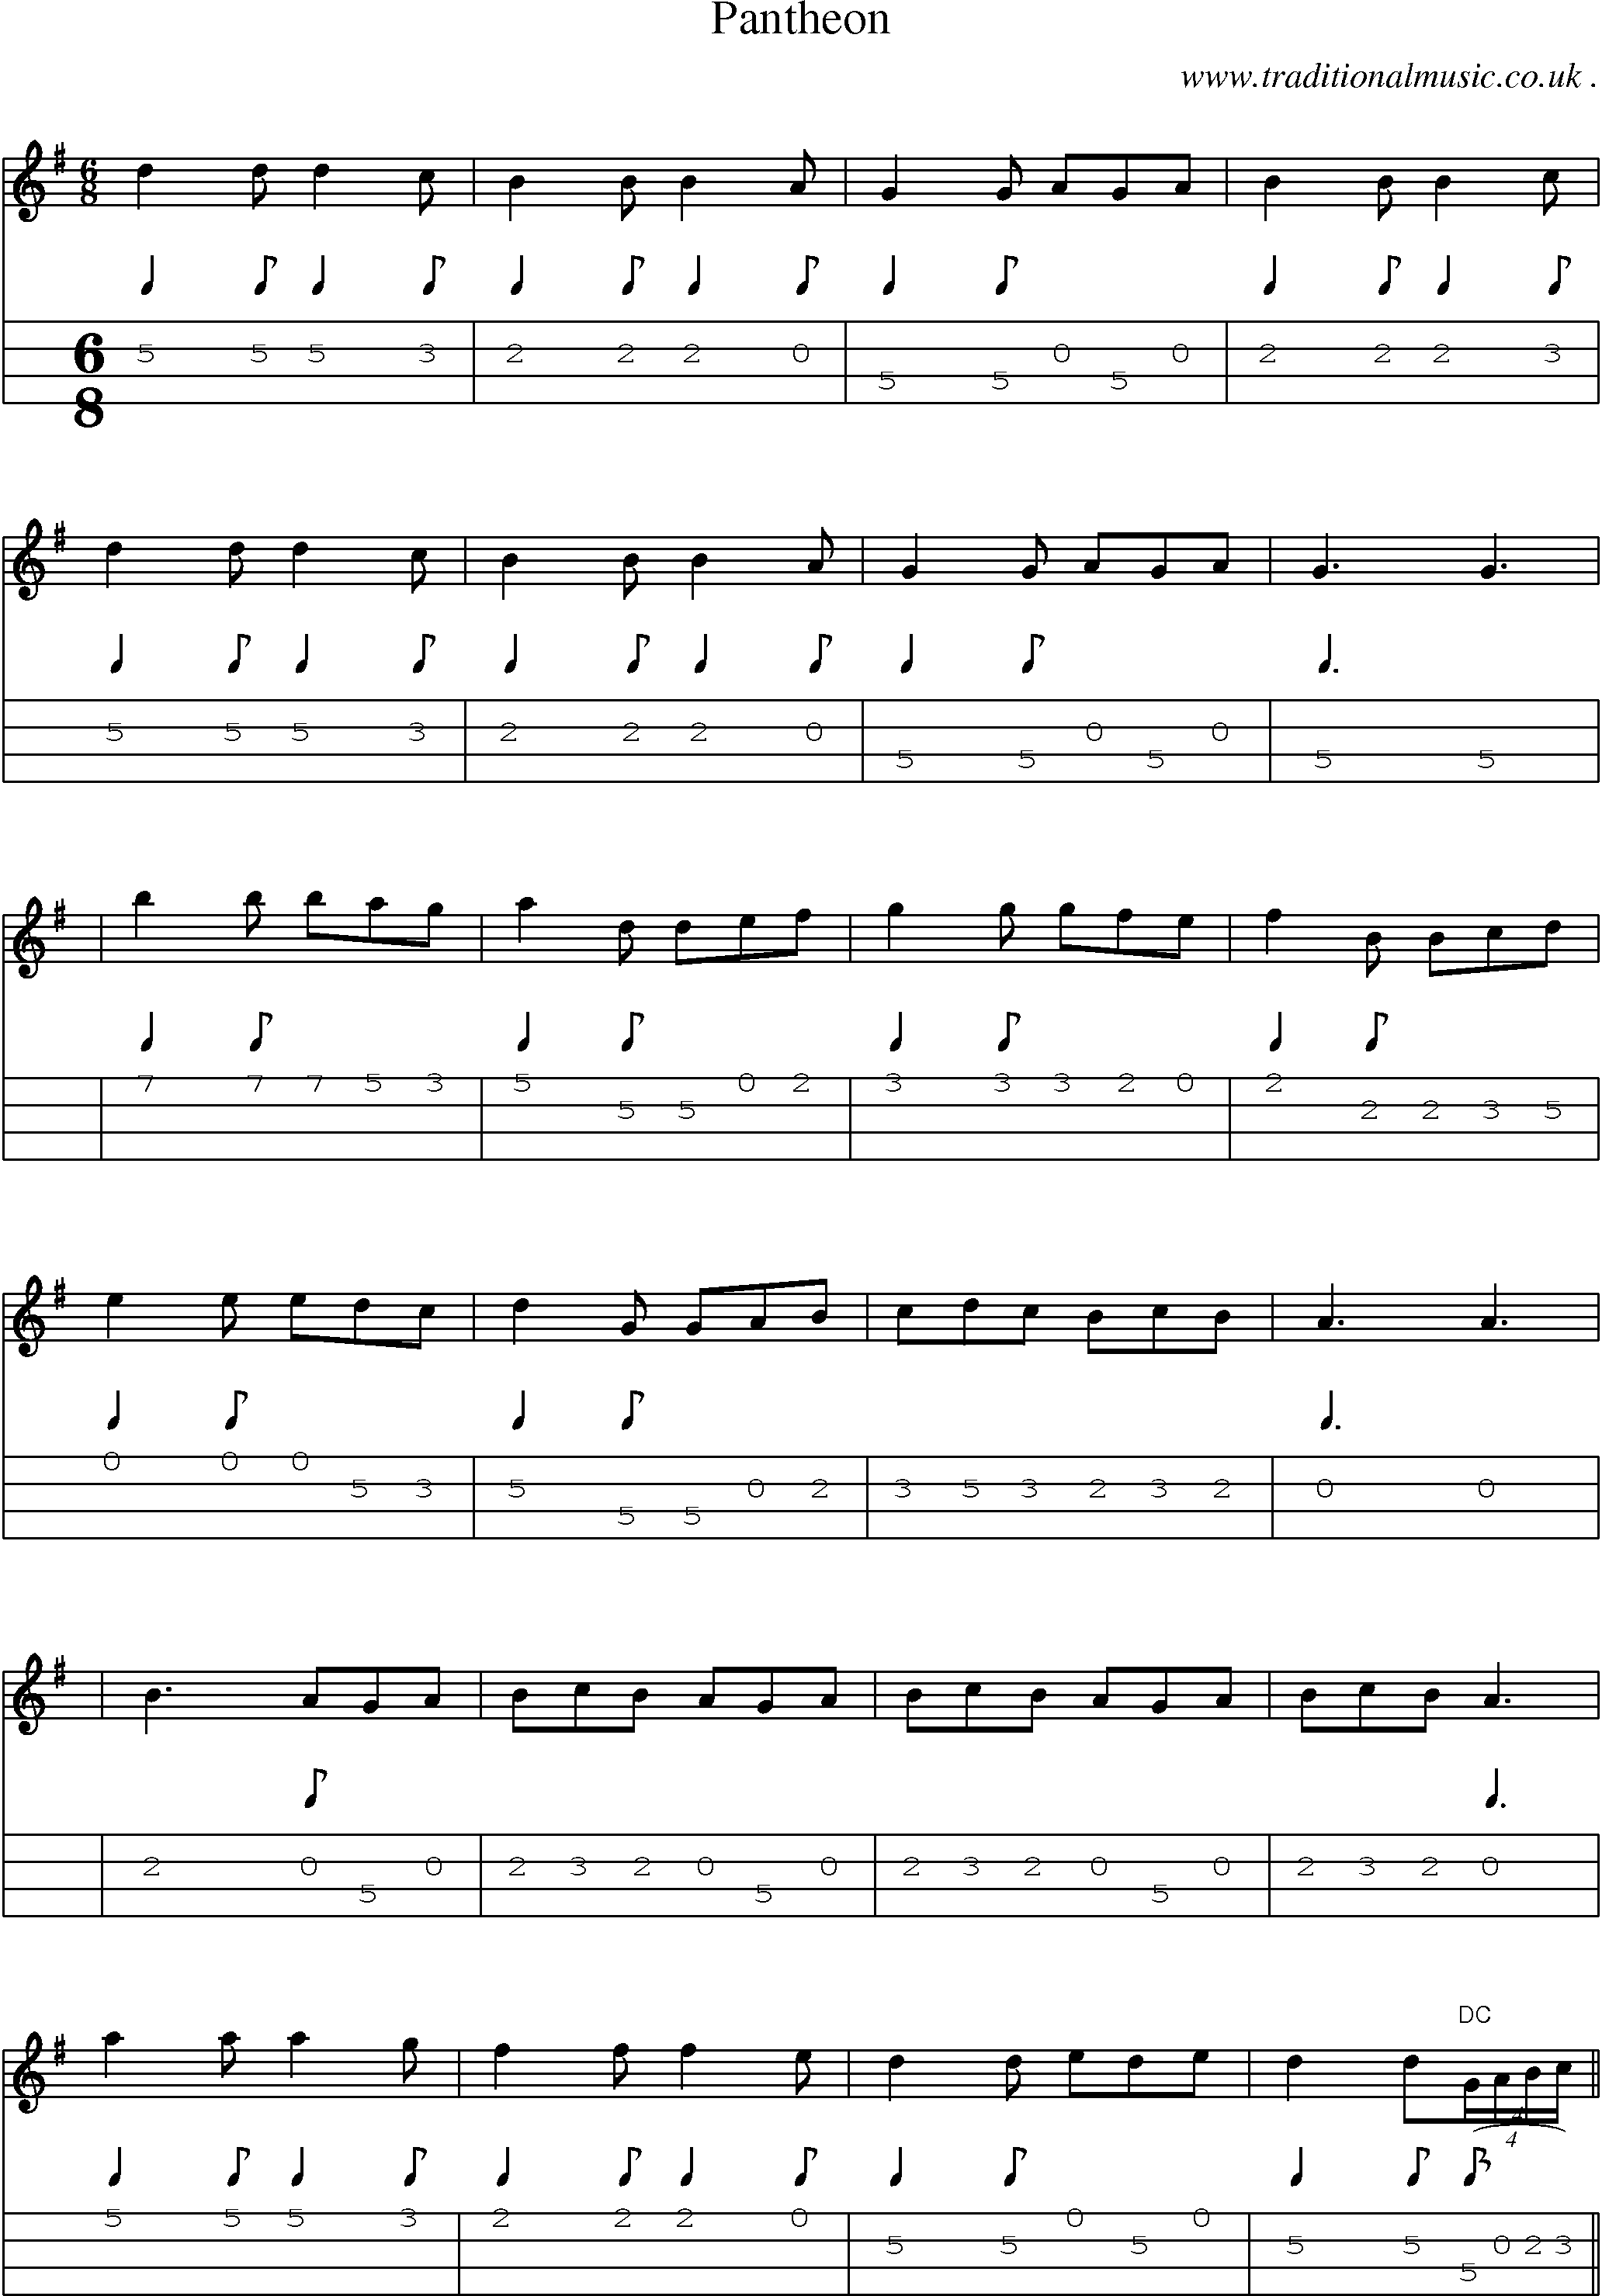 Sheet-Music and Mandolin Tabs for Pantheon